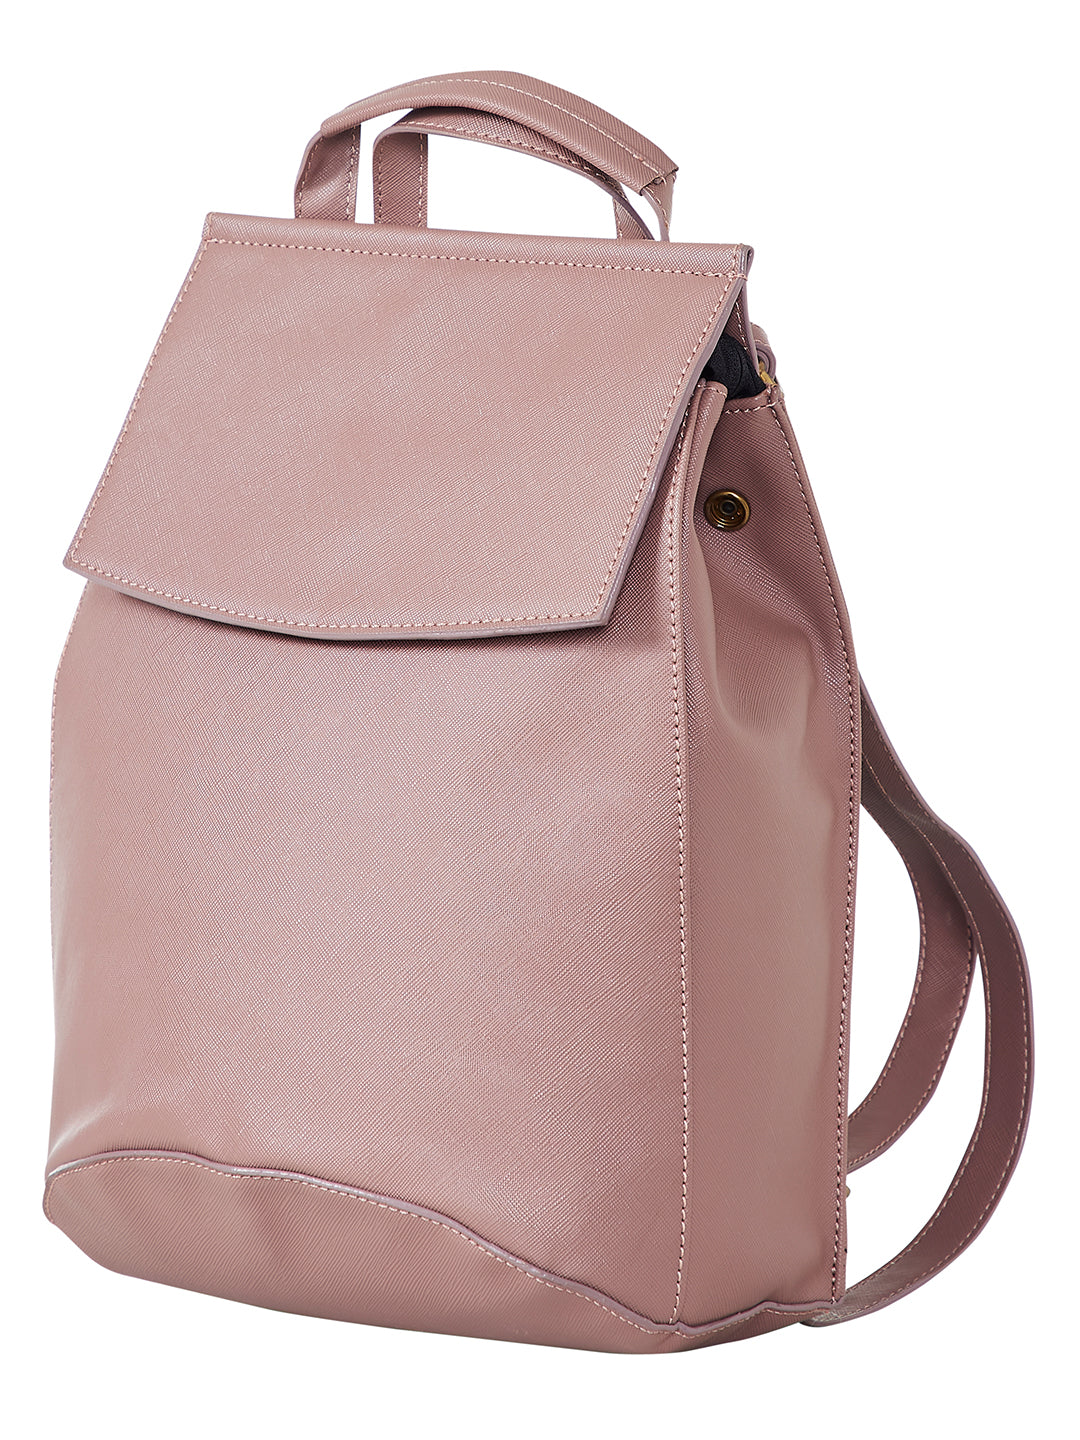 Mona B Convertible Daypack for Offices Schools and Colleges with Stylish Design for Women: Lavender